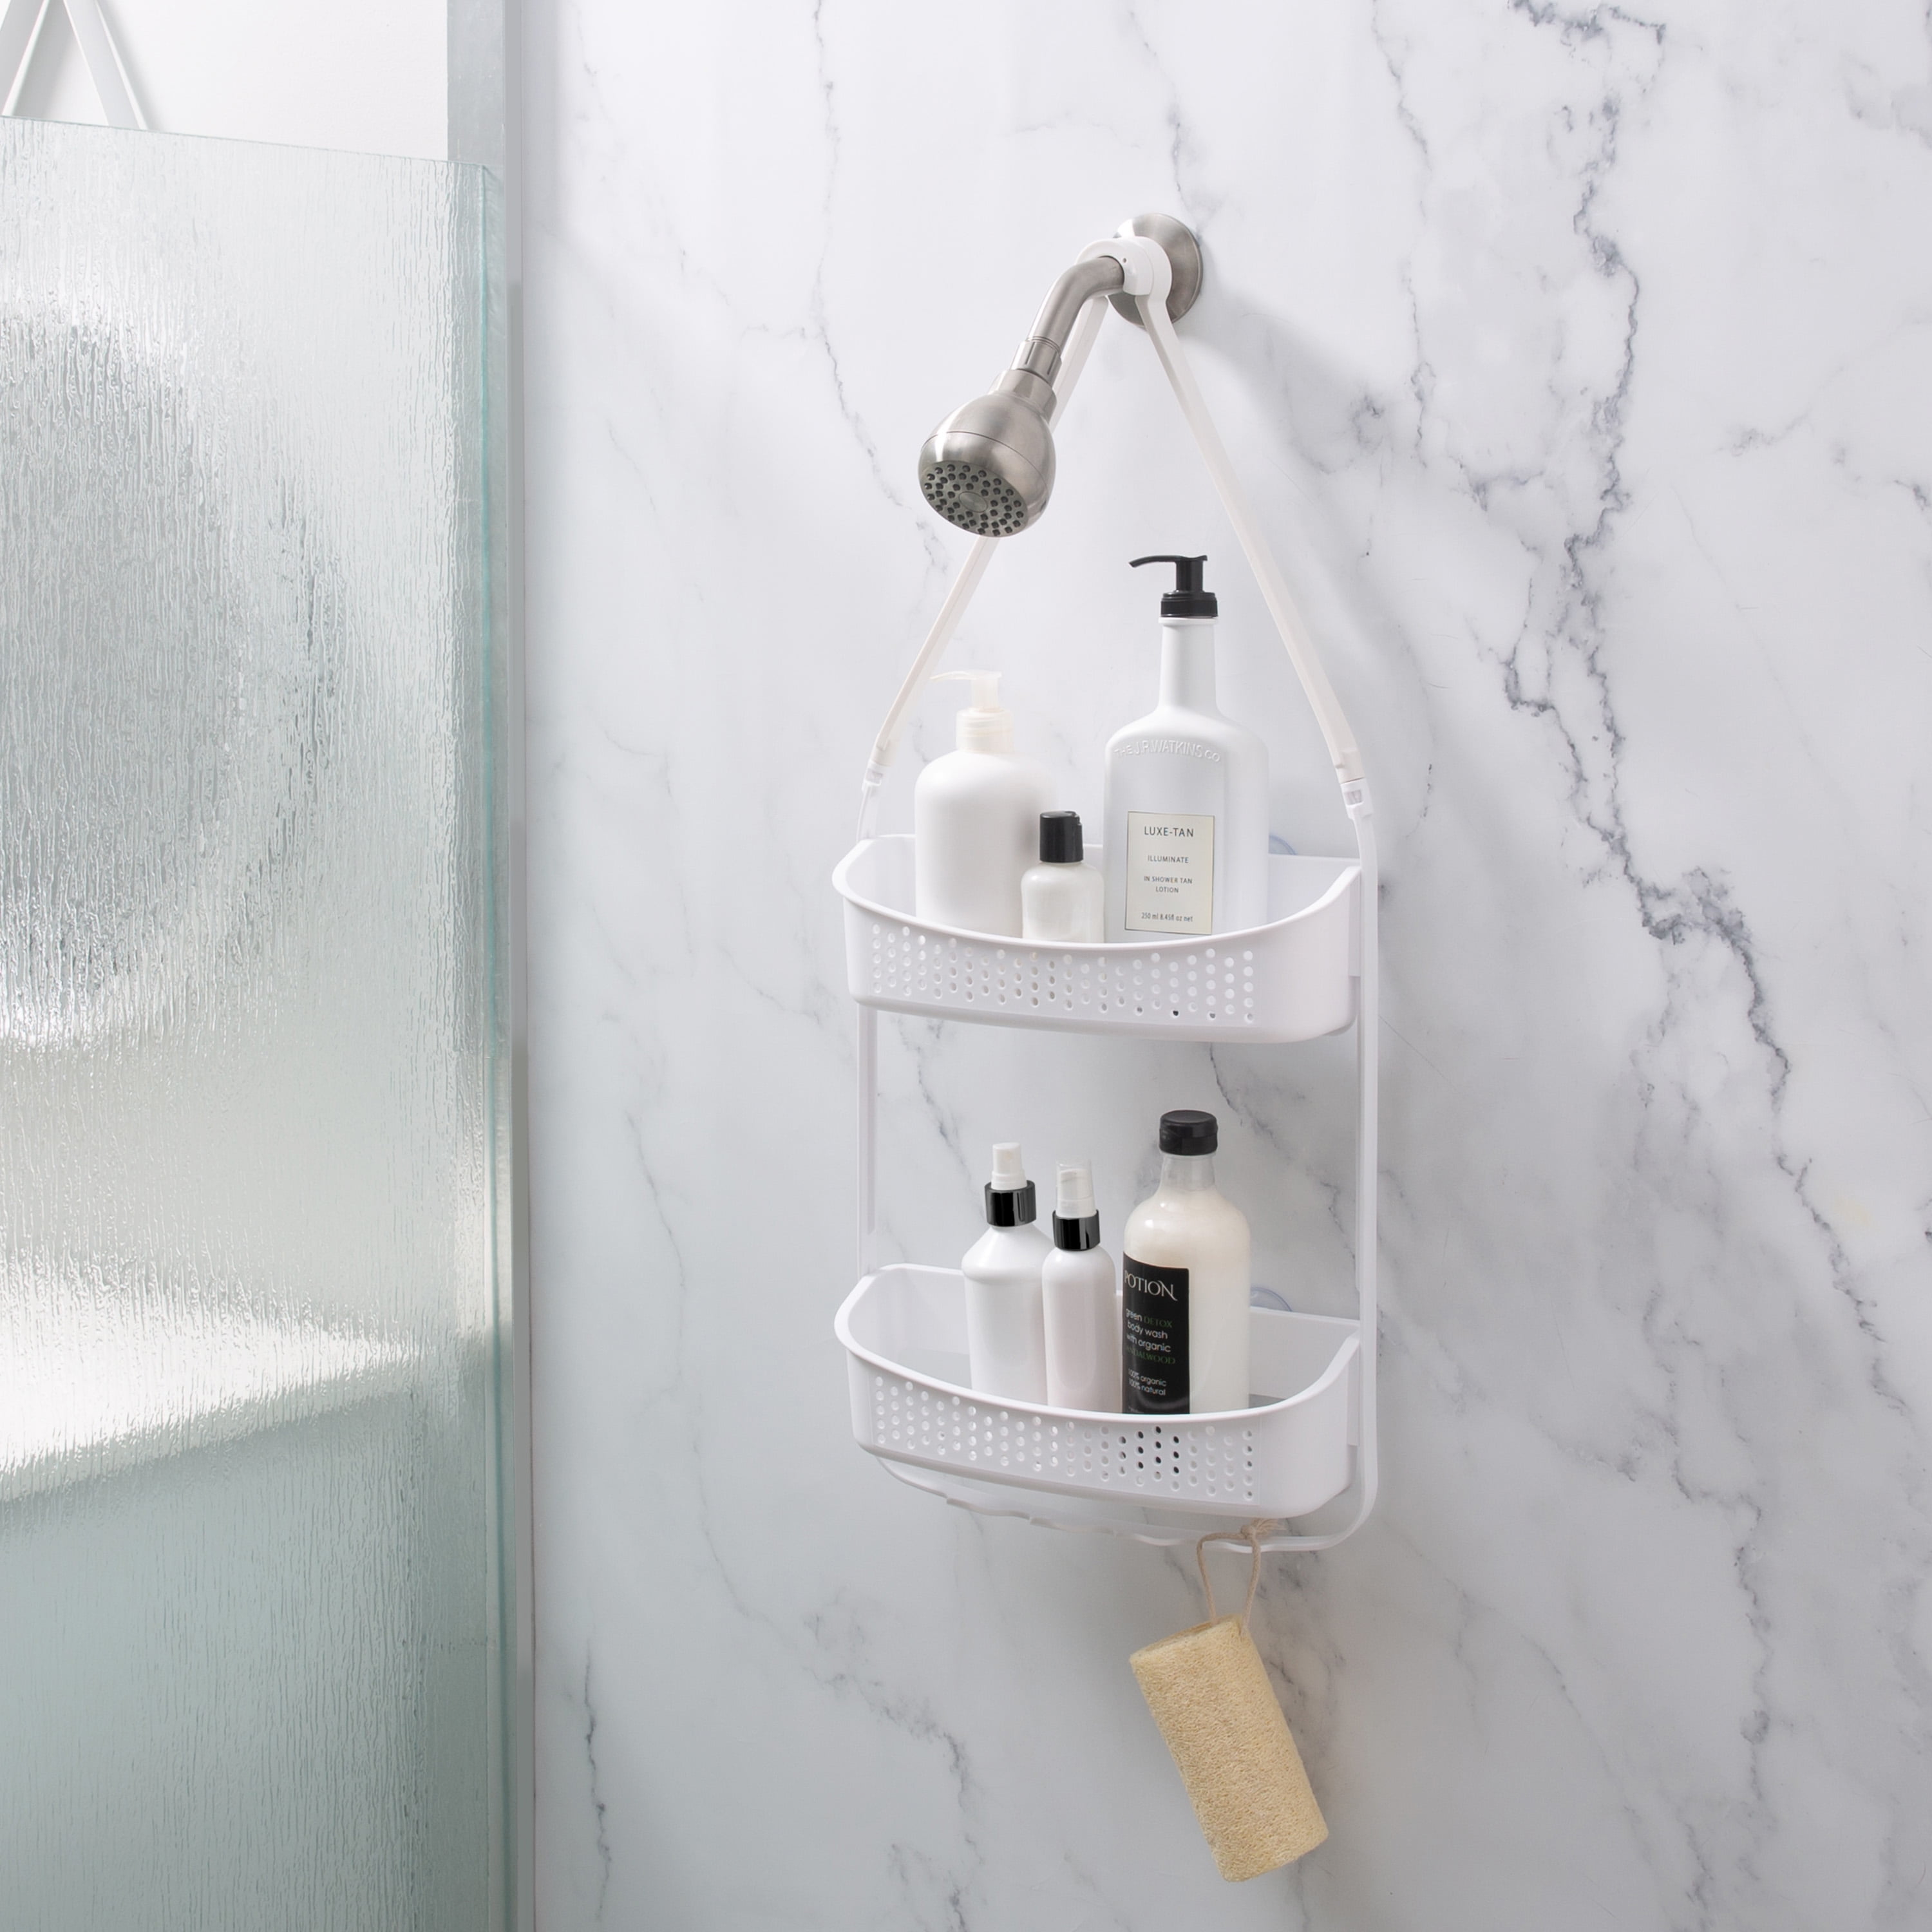 You wanted to see my shower caddy so here it is! #bathroomstorage #rvb, eucalyptus showers